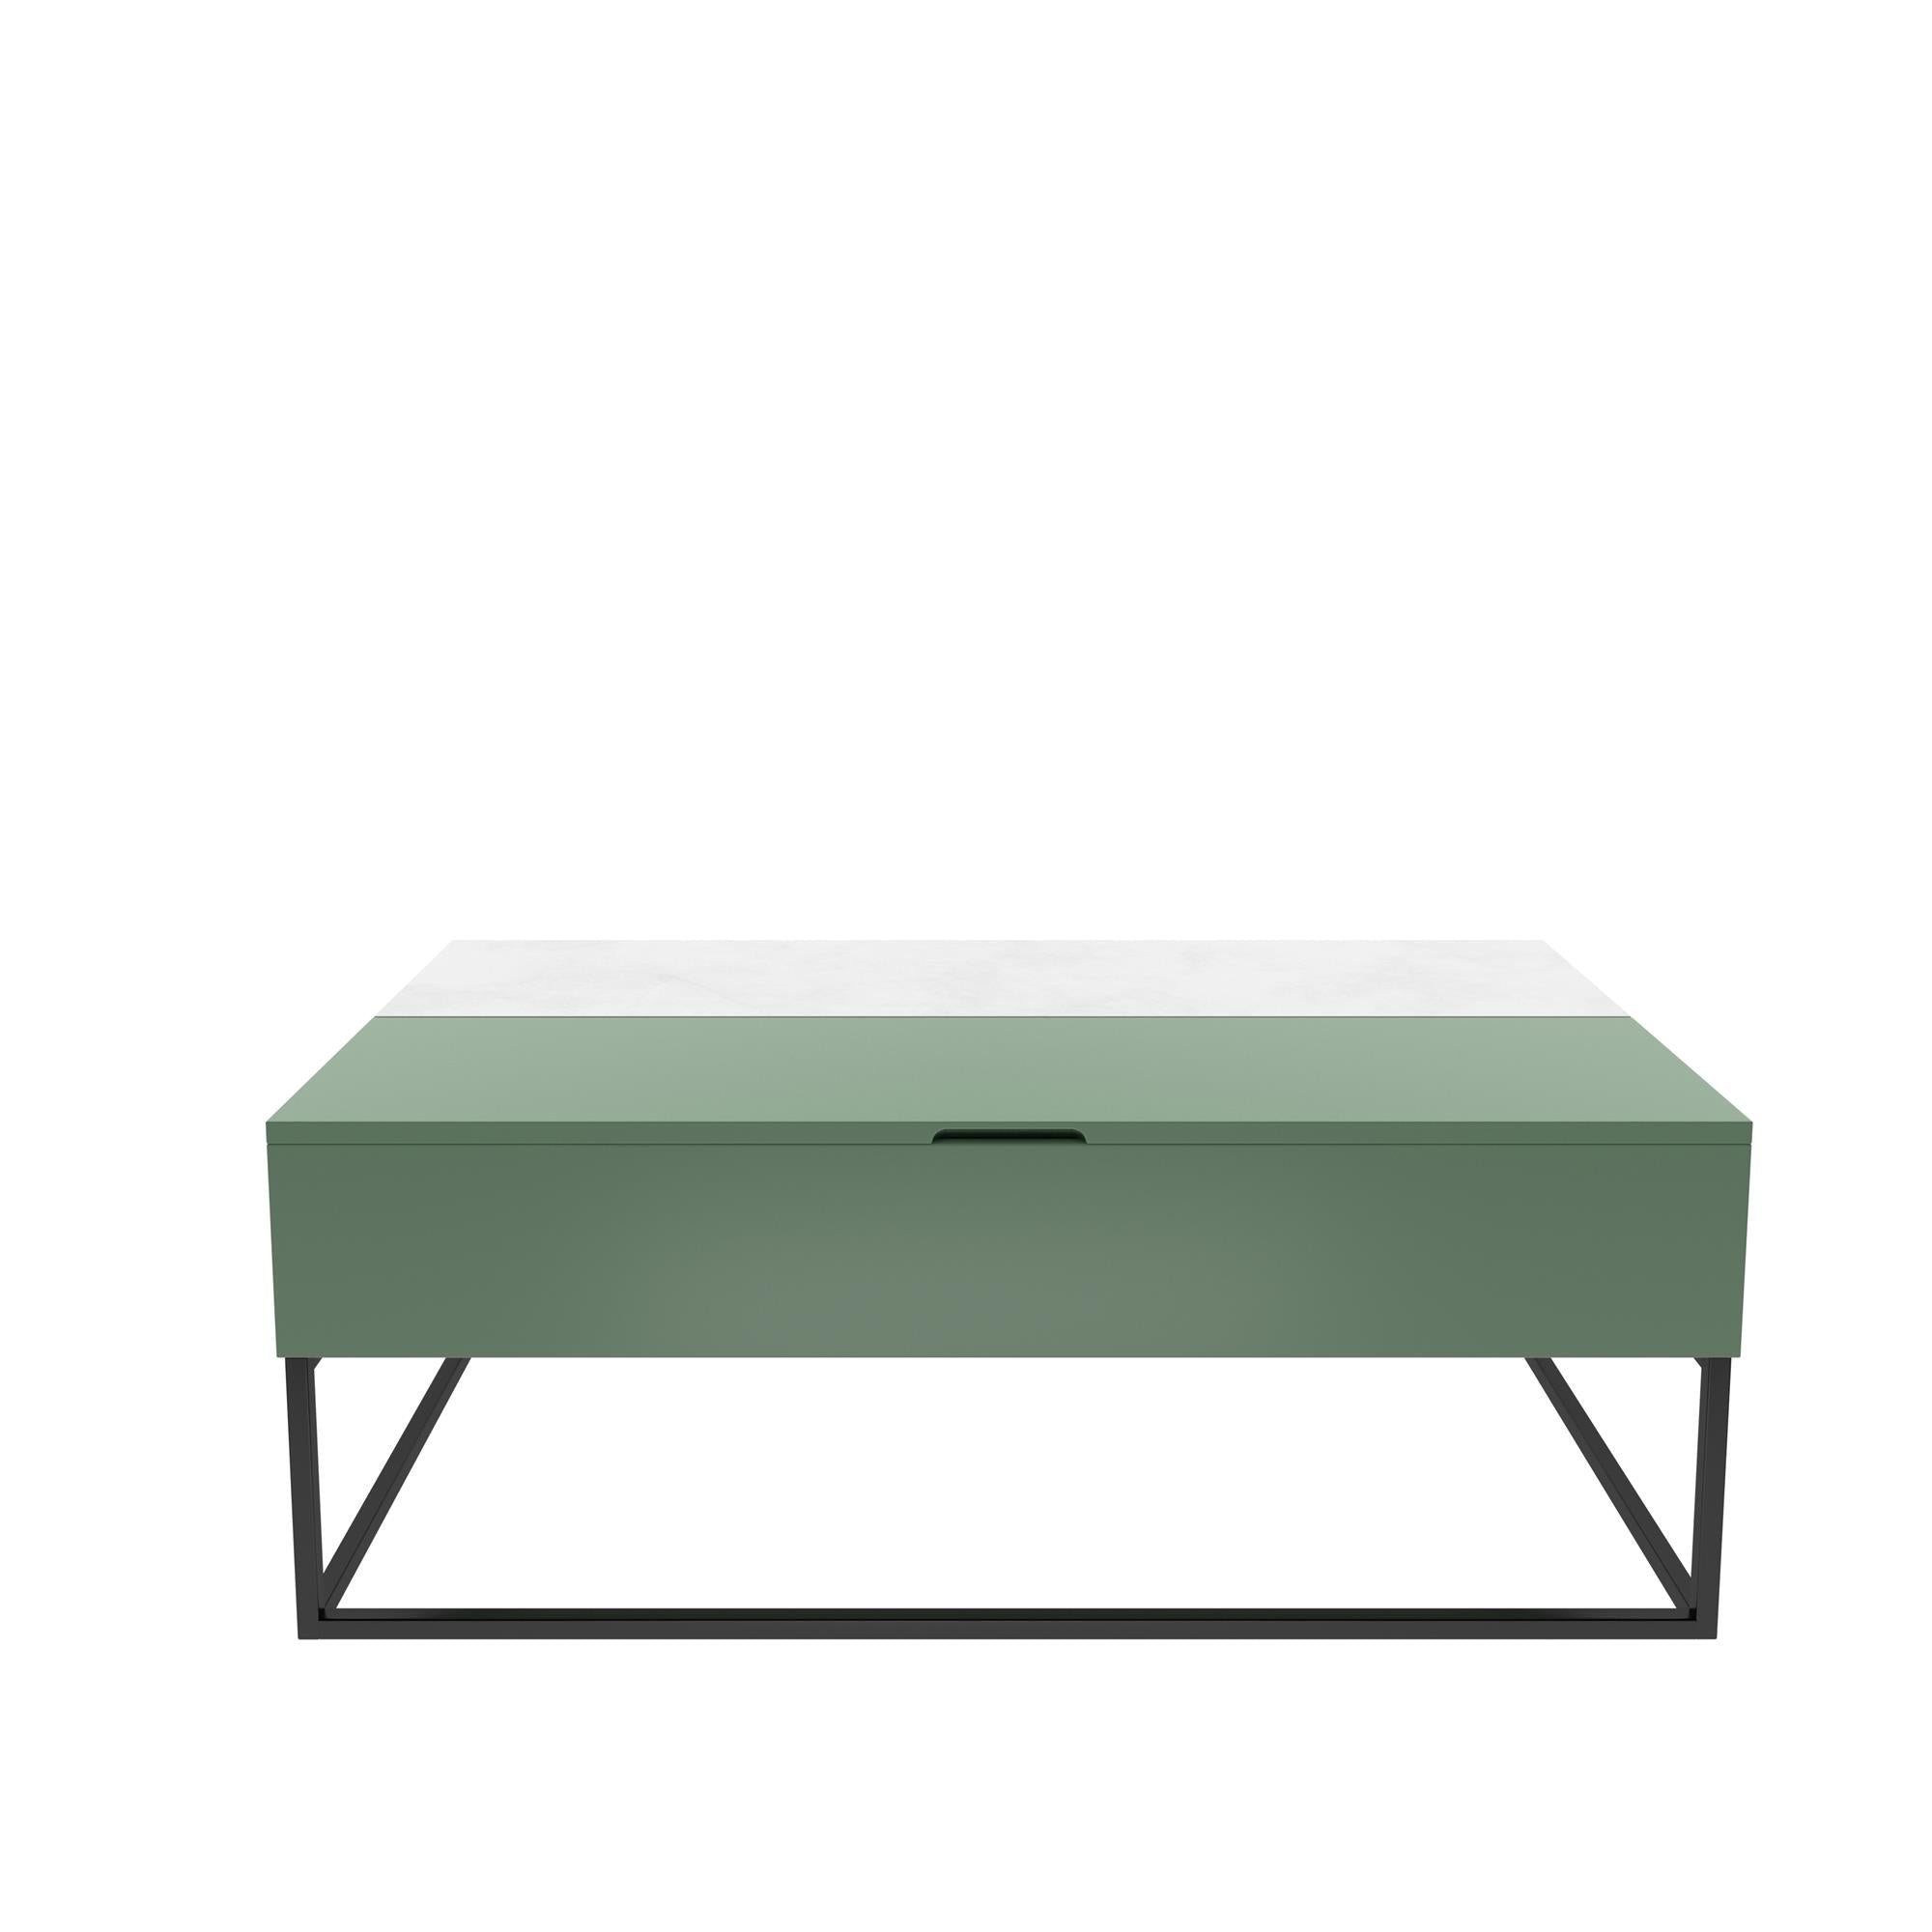 The Village Perry Lift-Top Coffee Table, Sage Green - Sage